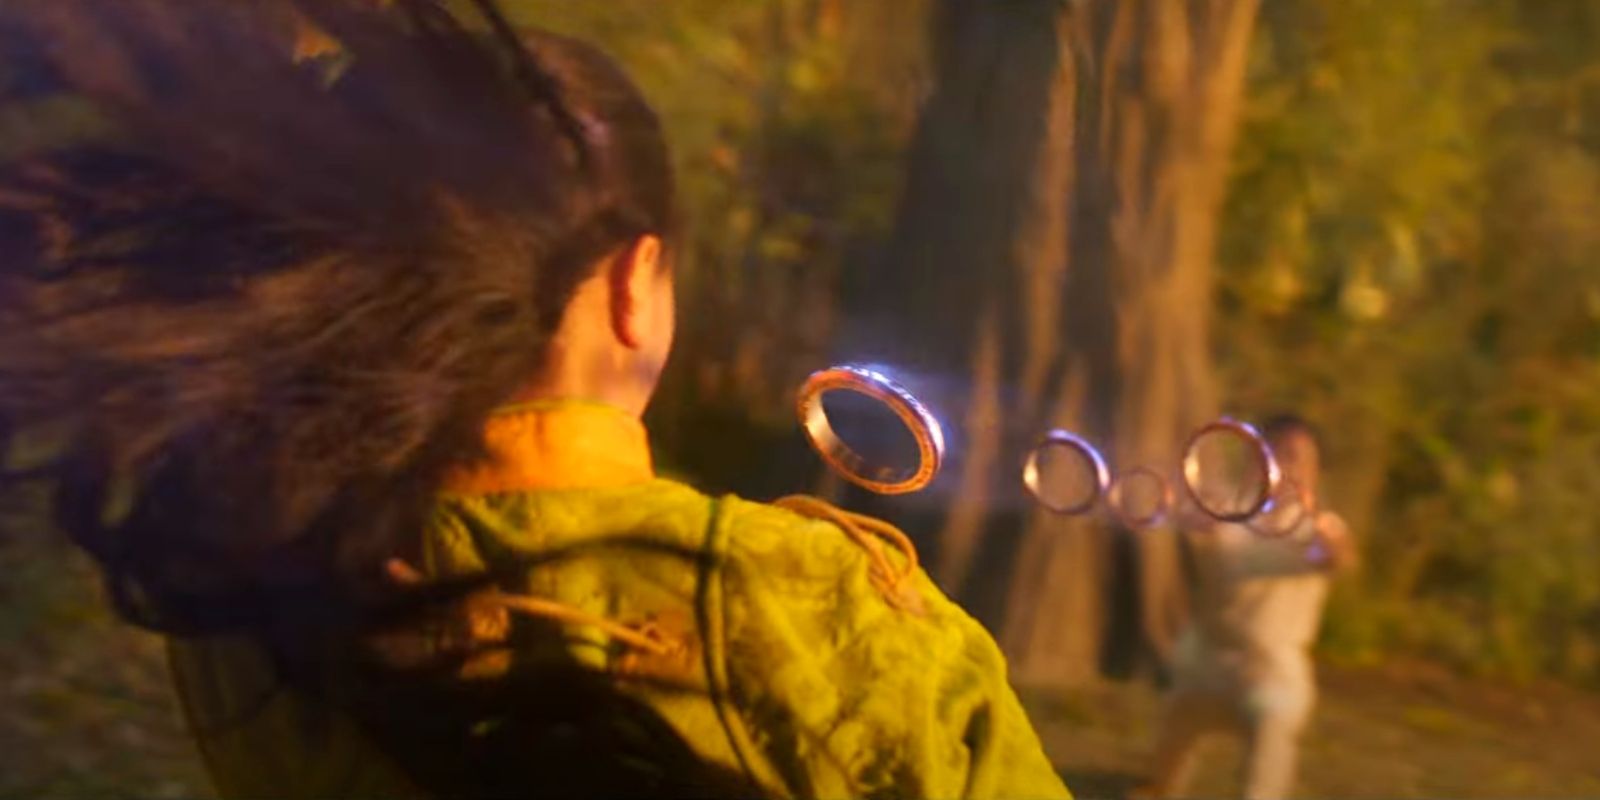 New Shang-Chi Trailer Unveils The Real Mandarin, Brings Back Abomination And Wong